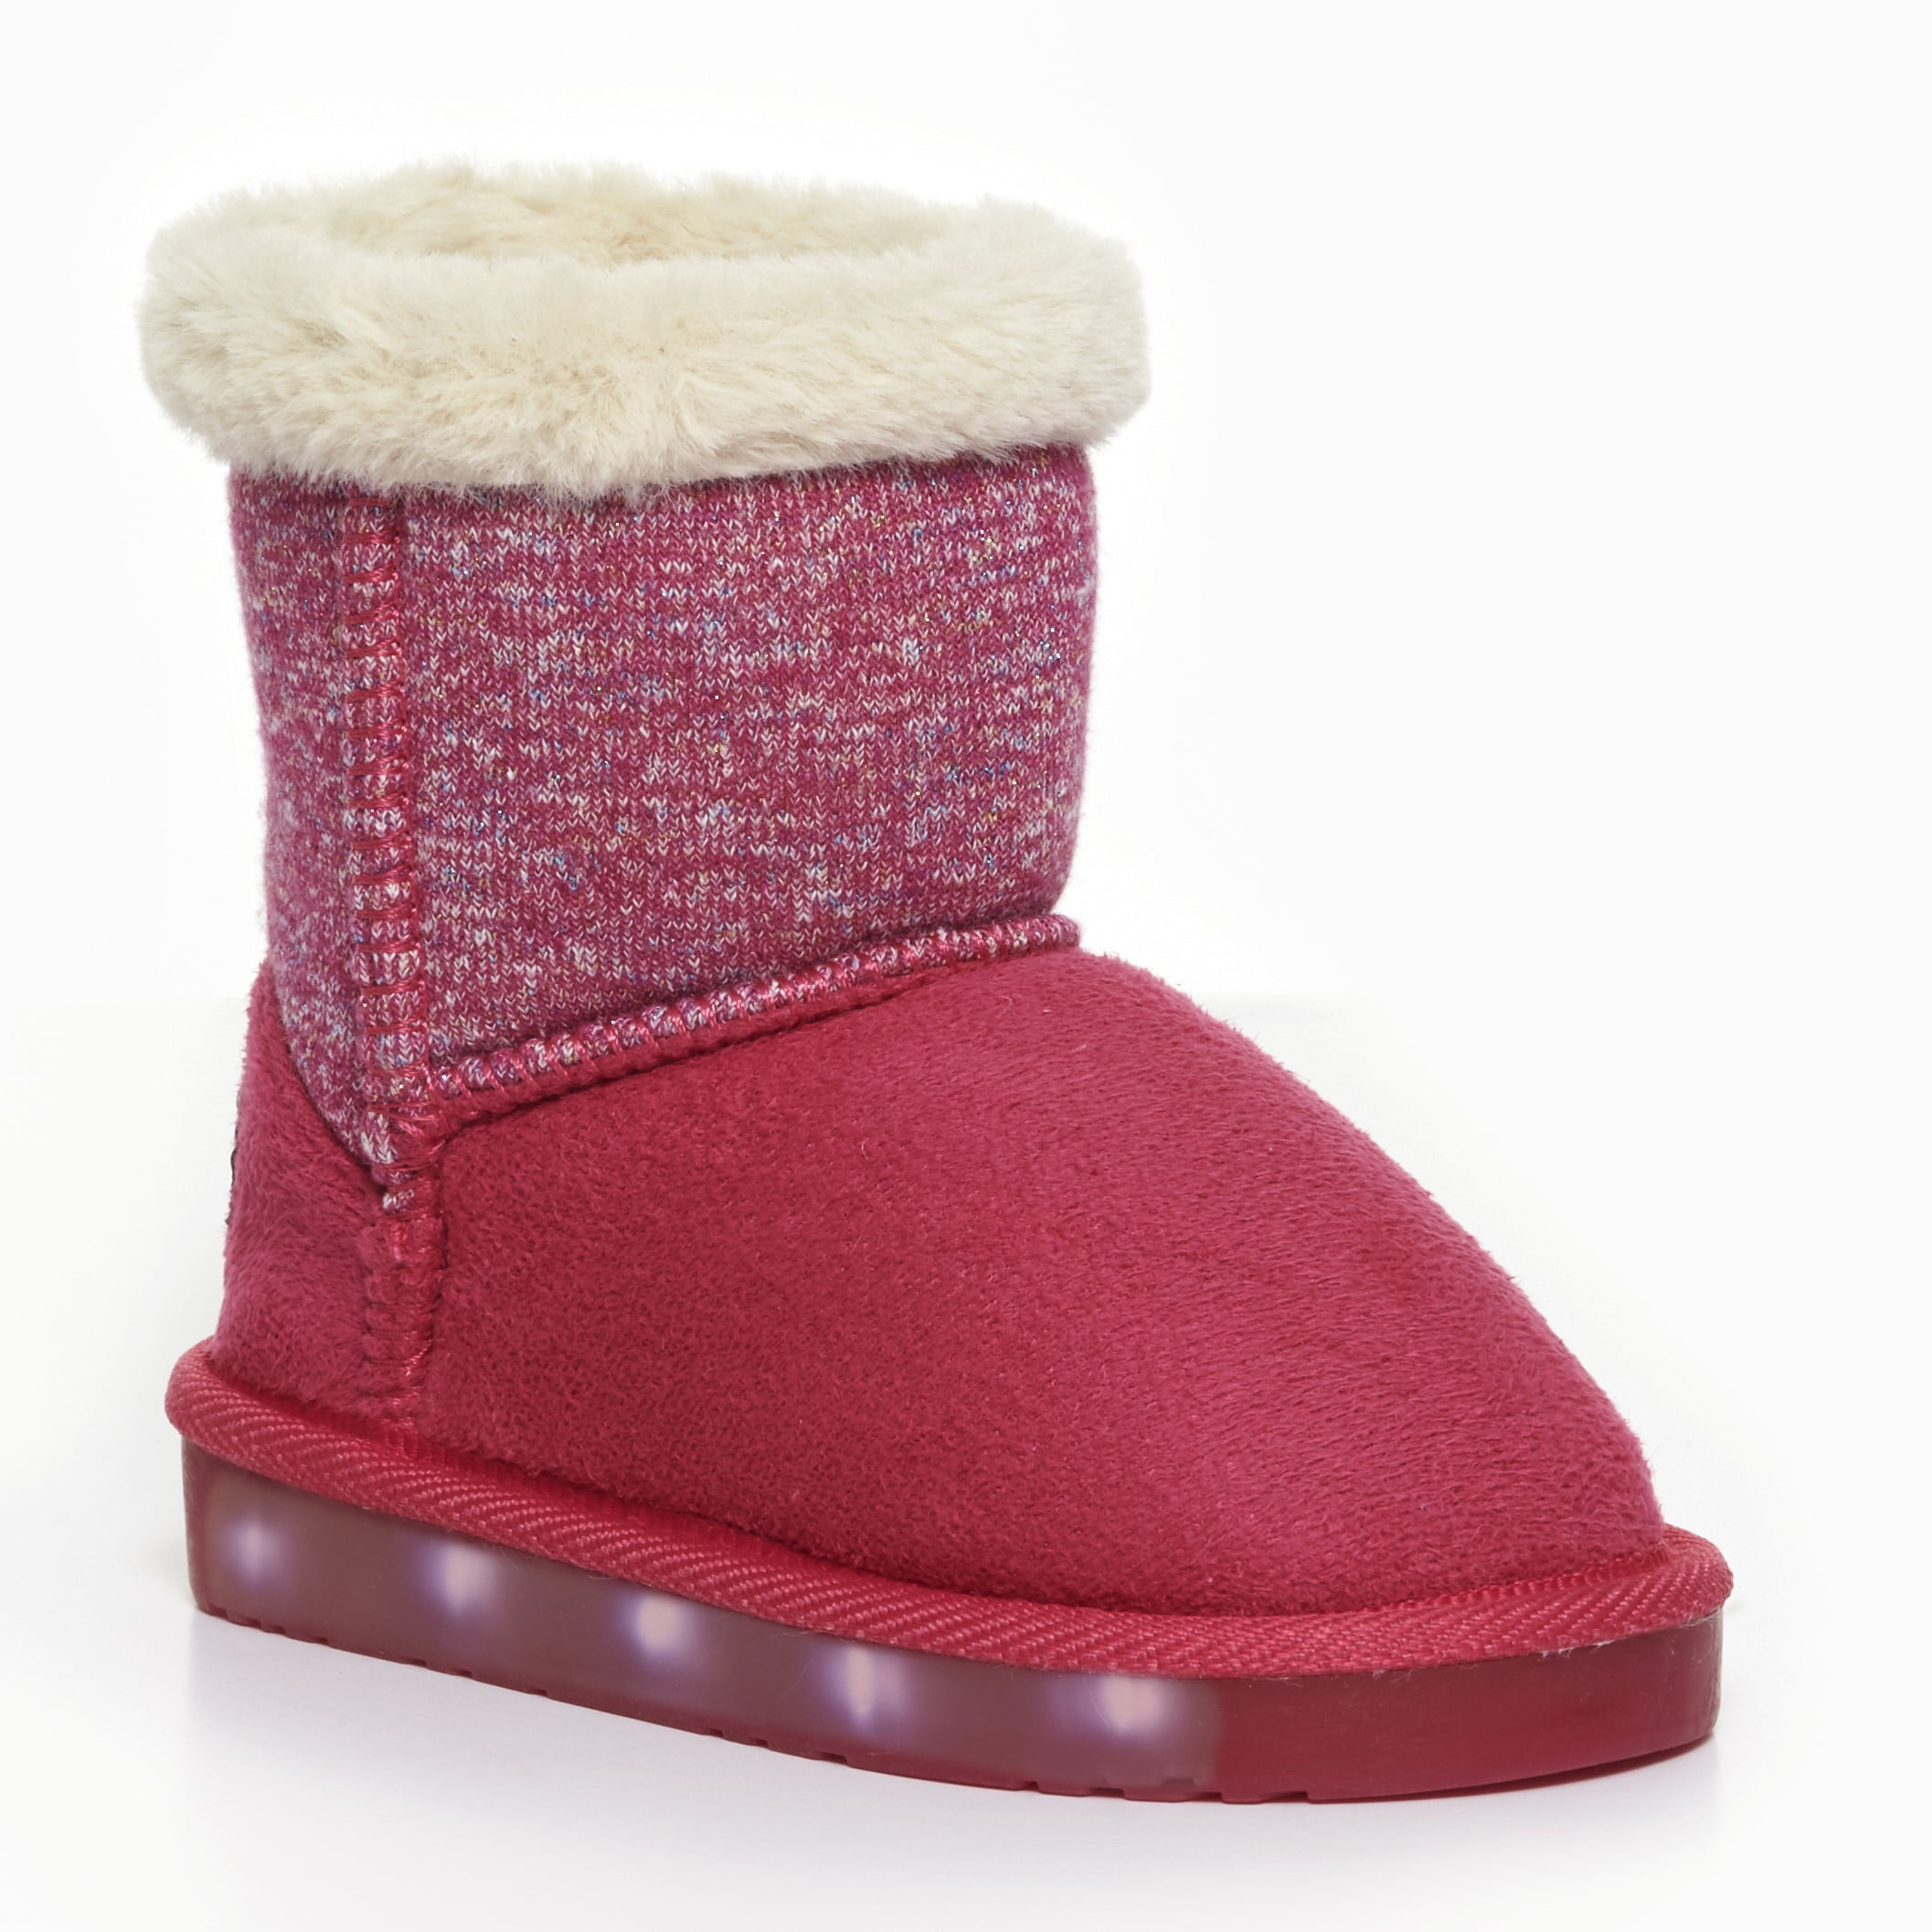 Winter Snow Adorable Casual Toddler Girl Hot Pink Suede Shoes Boots Mid Calf 